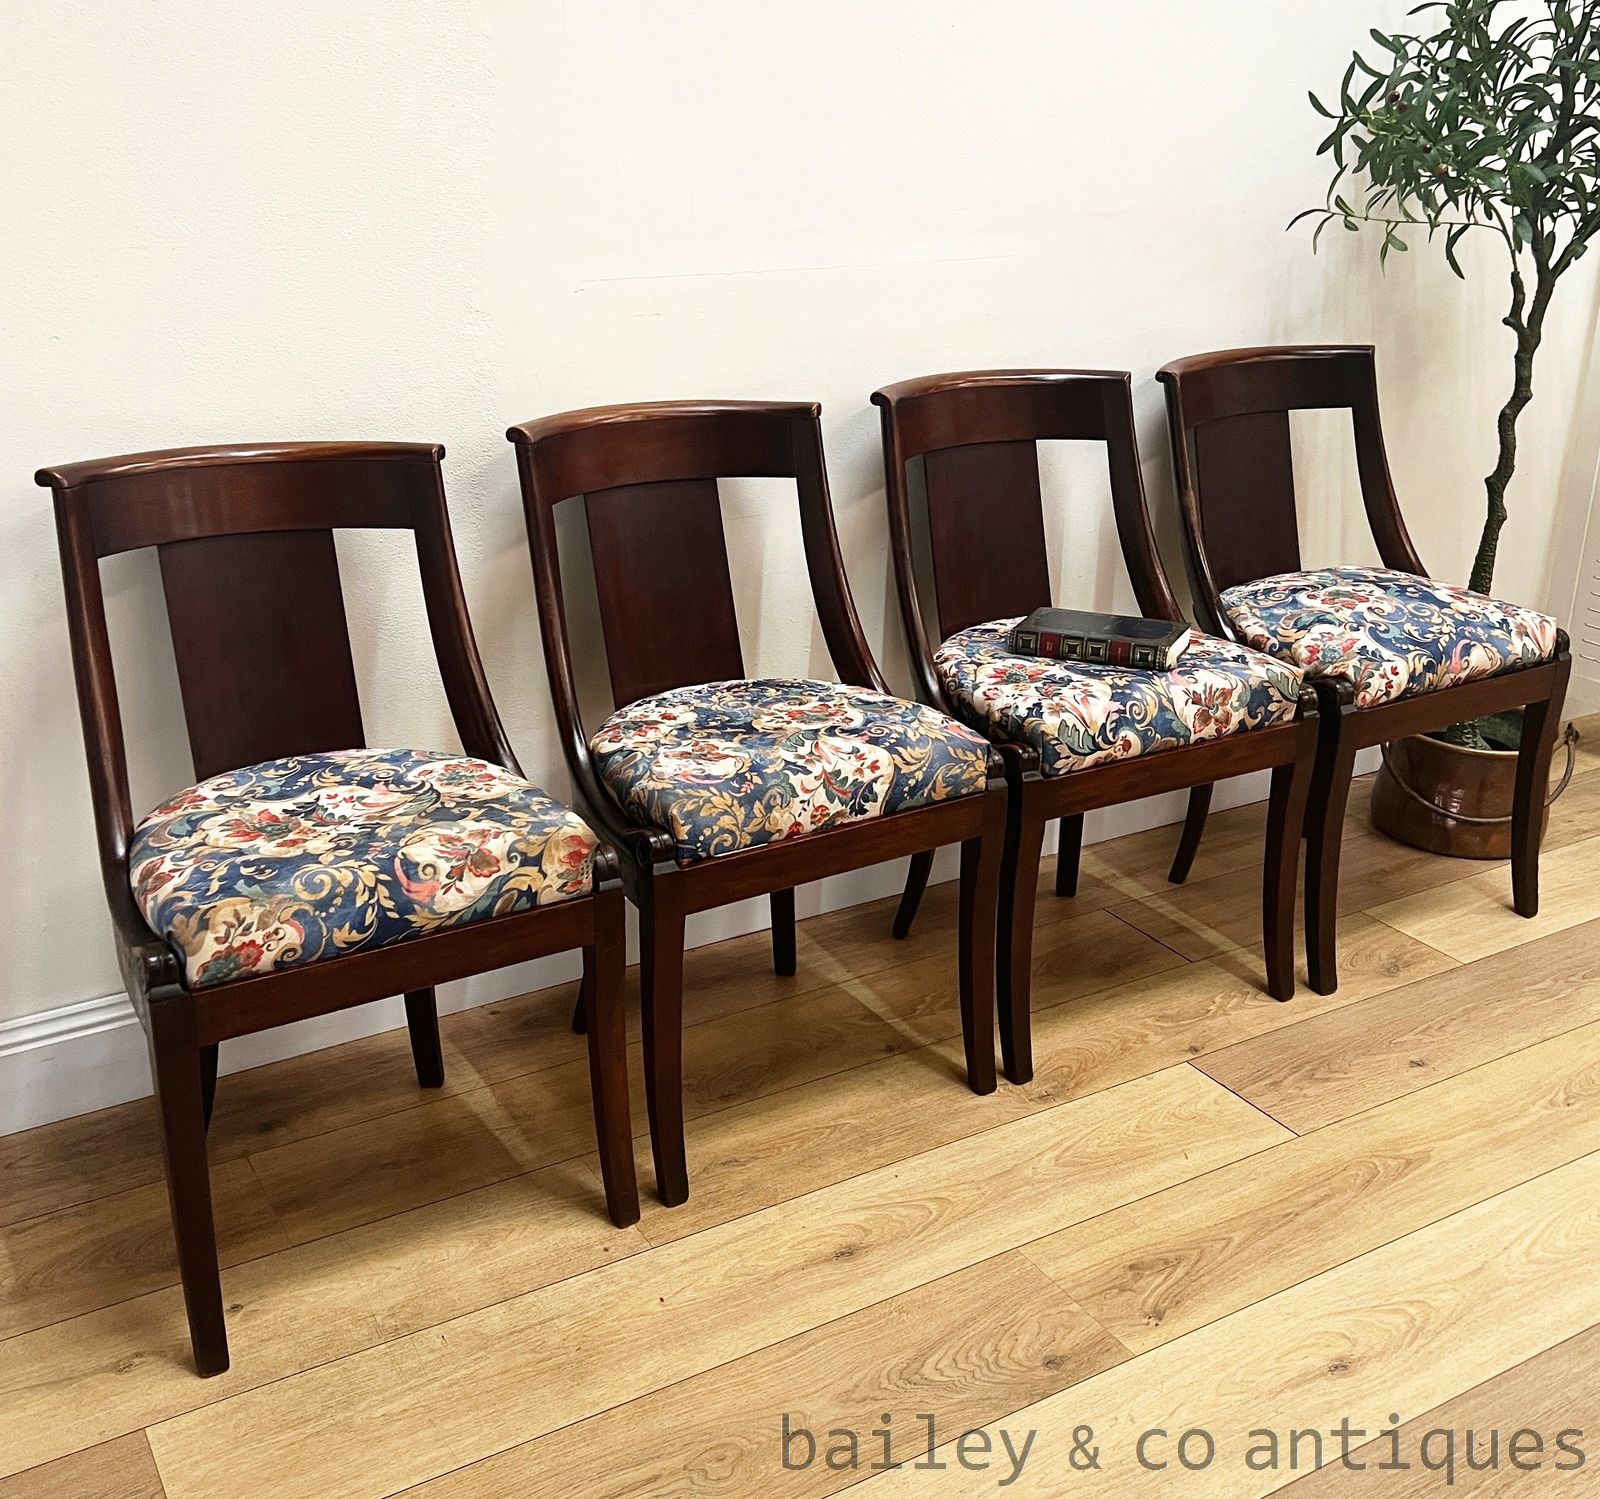  Set of Four Antique French Empire Mahogany Gondola Dining Chairs - FRP08b  for sale